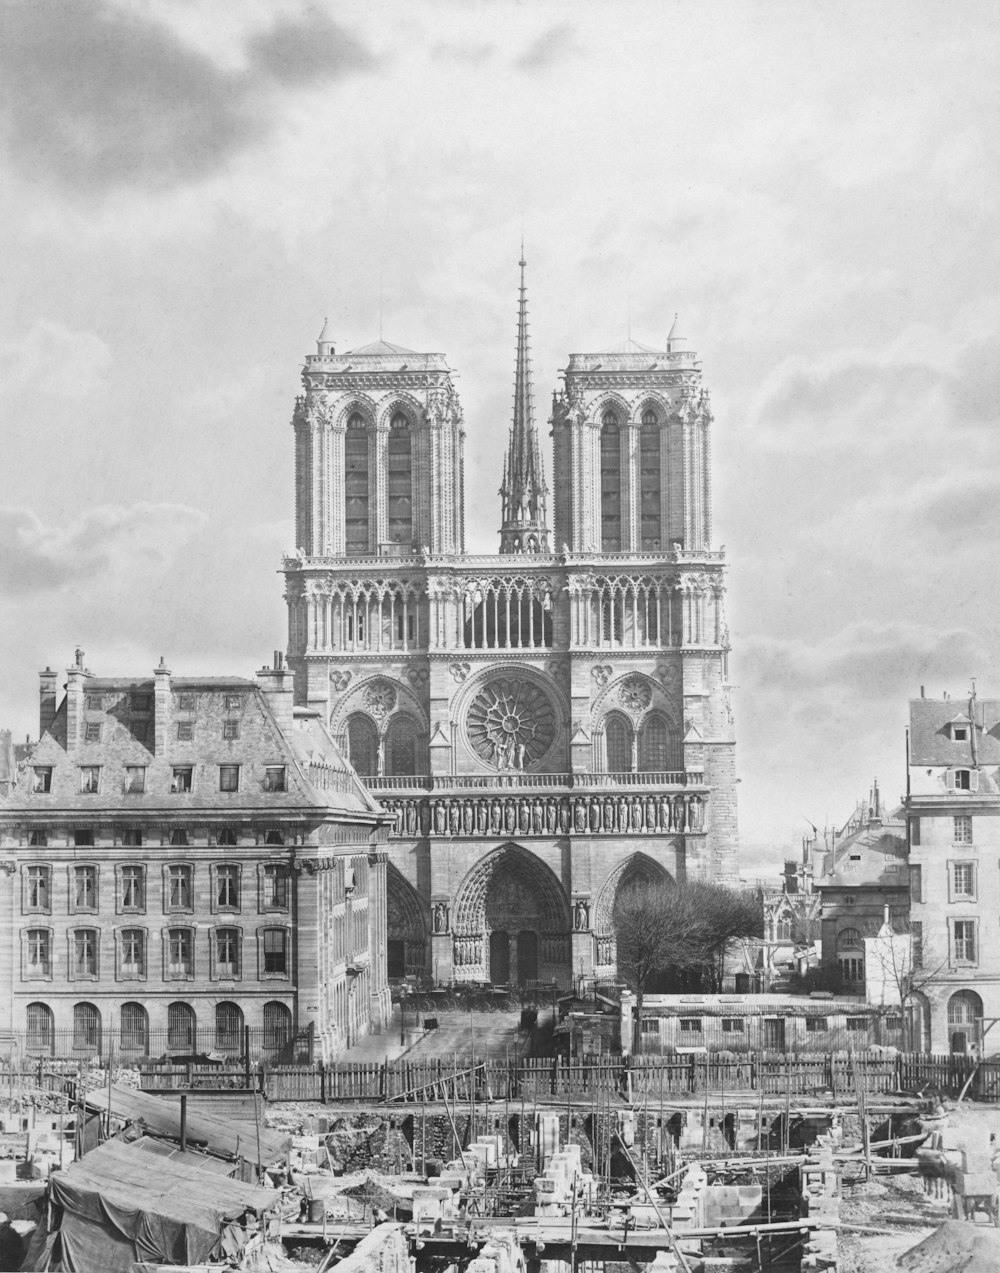 a black and white photo of a large cathedral